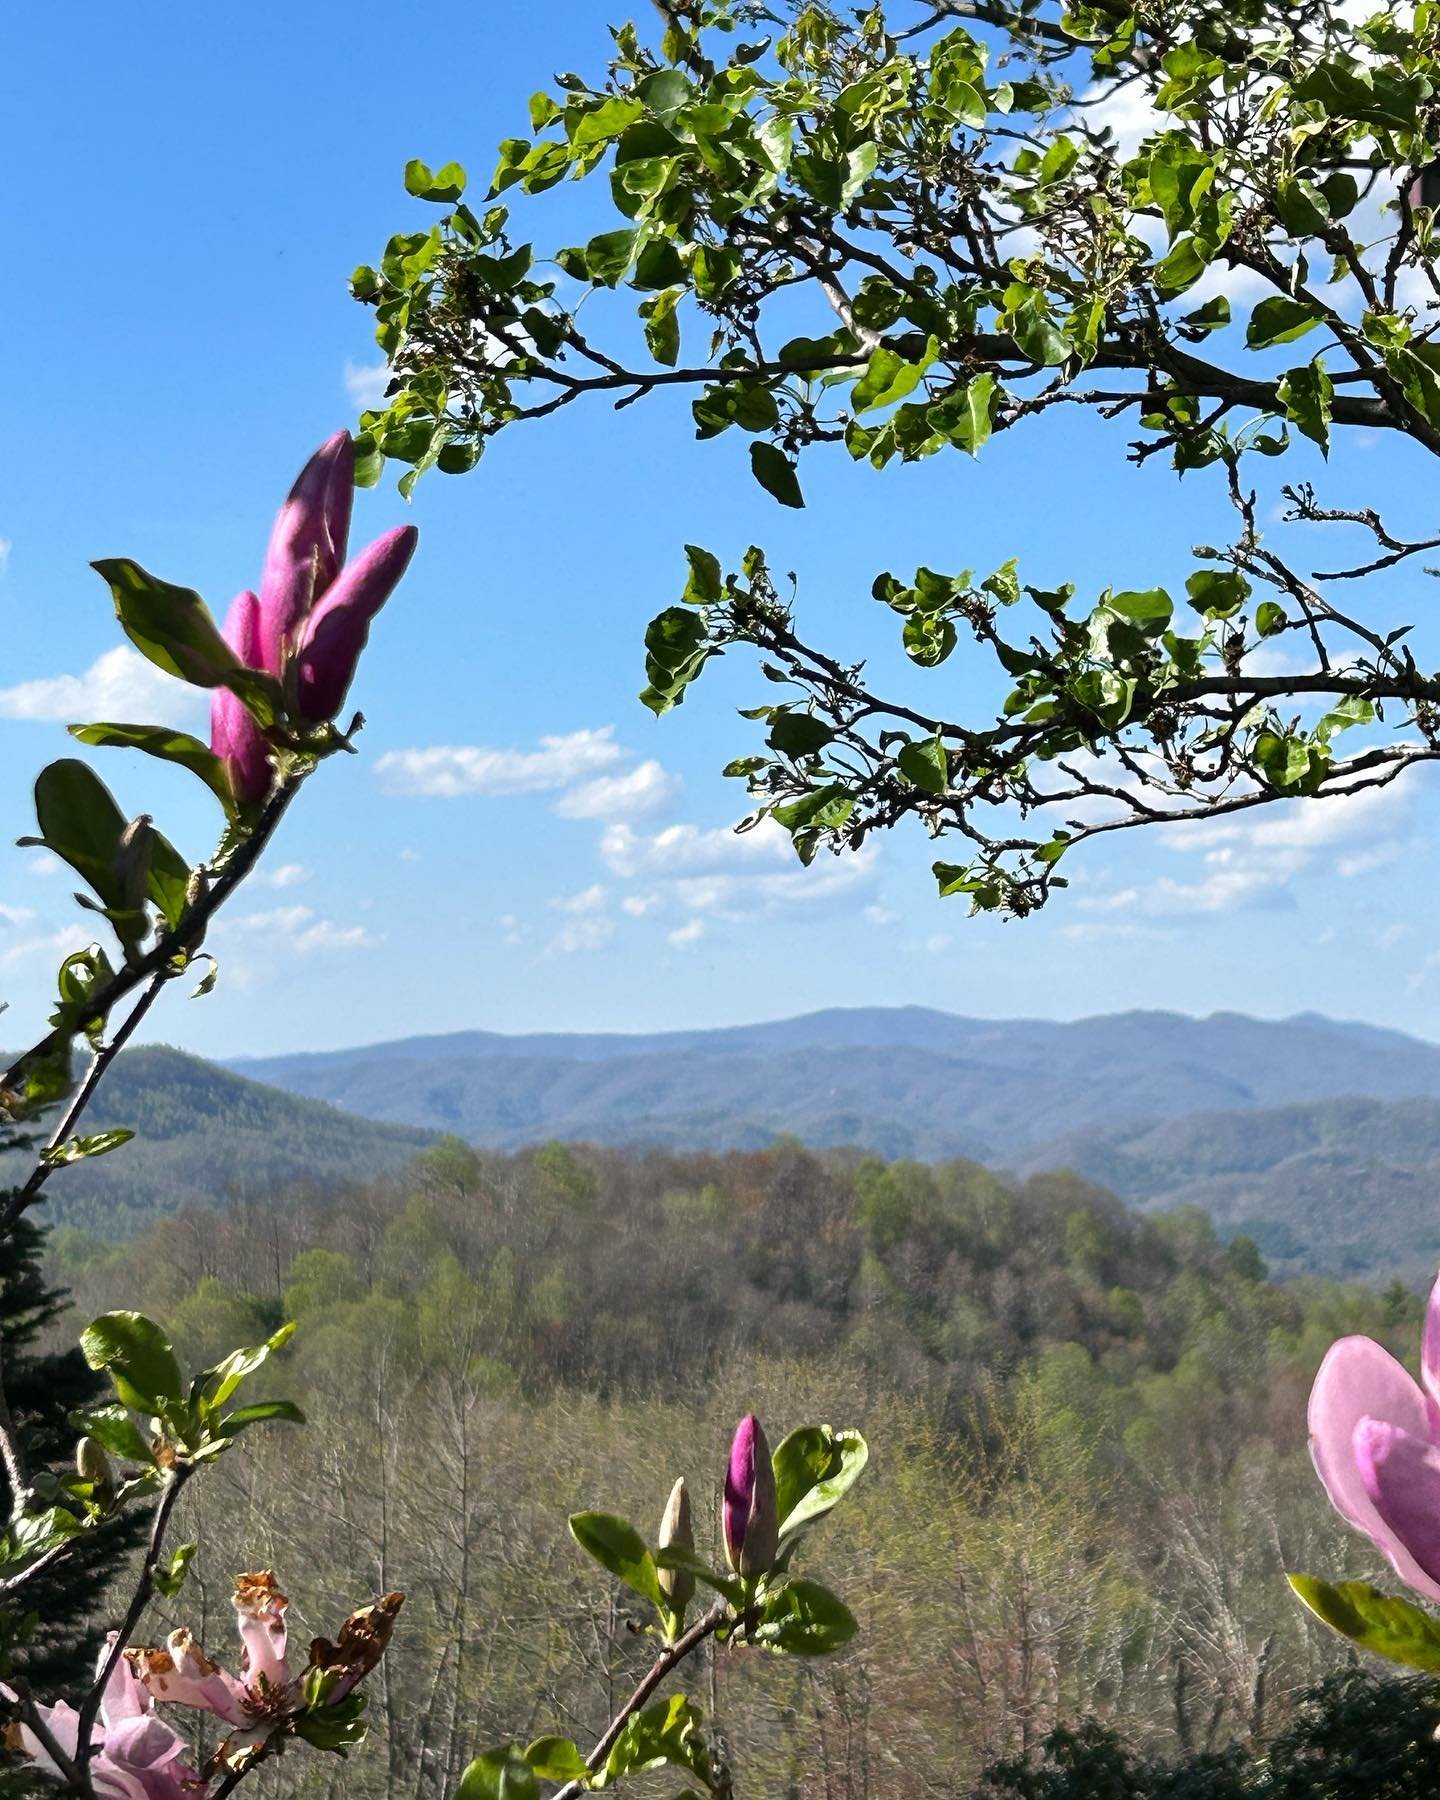 What a gorgeous day in Boone! #boone #boonenc #gardening #boonegardens #828